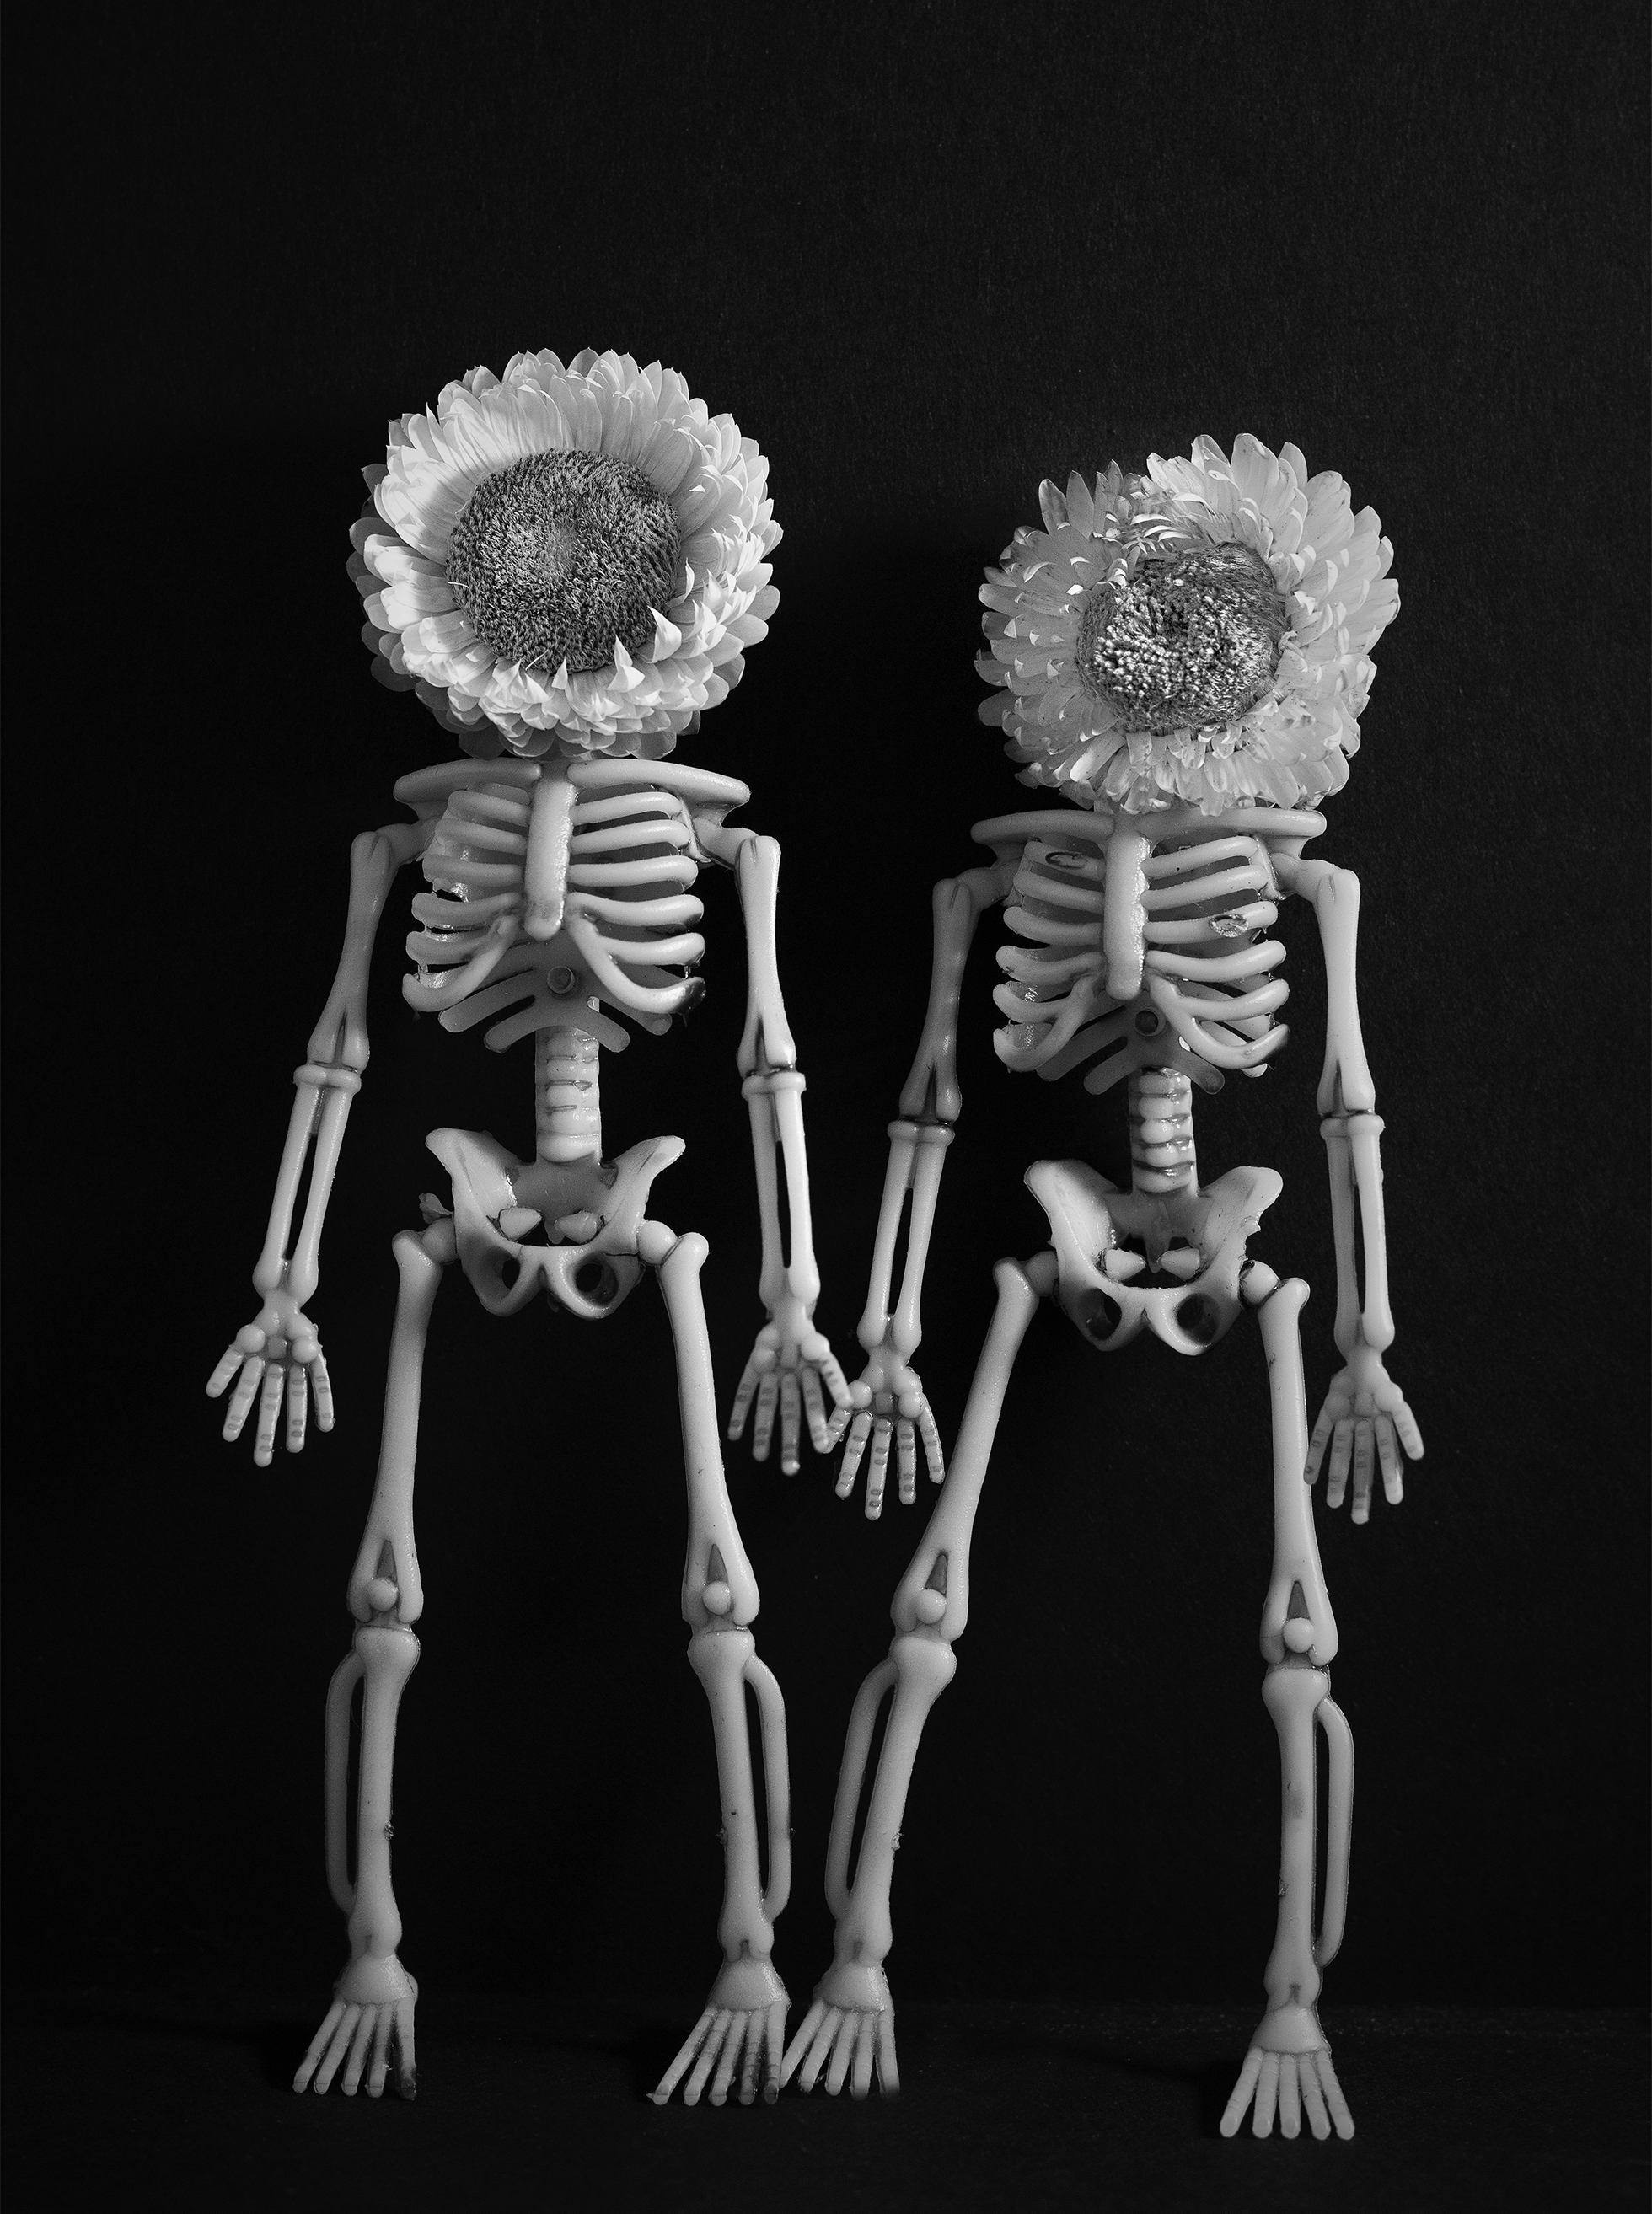 Two plastic toy skeletons of people seemingly standing up, the right one shorter than the left, each with a flower representing its face.